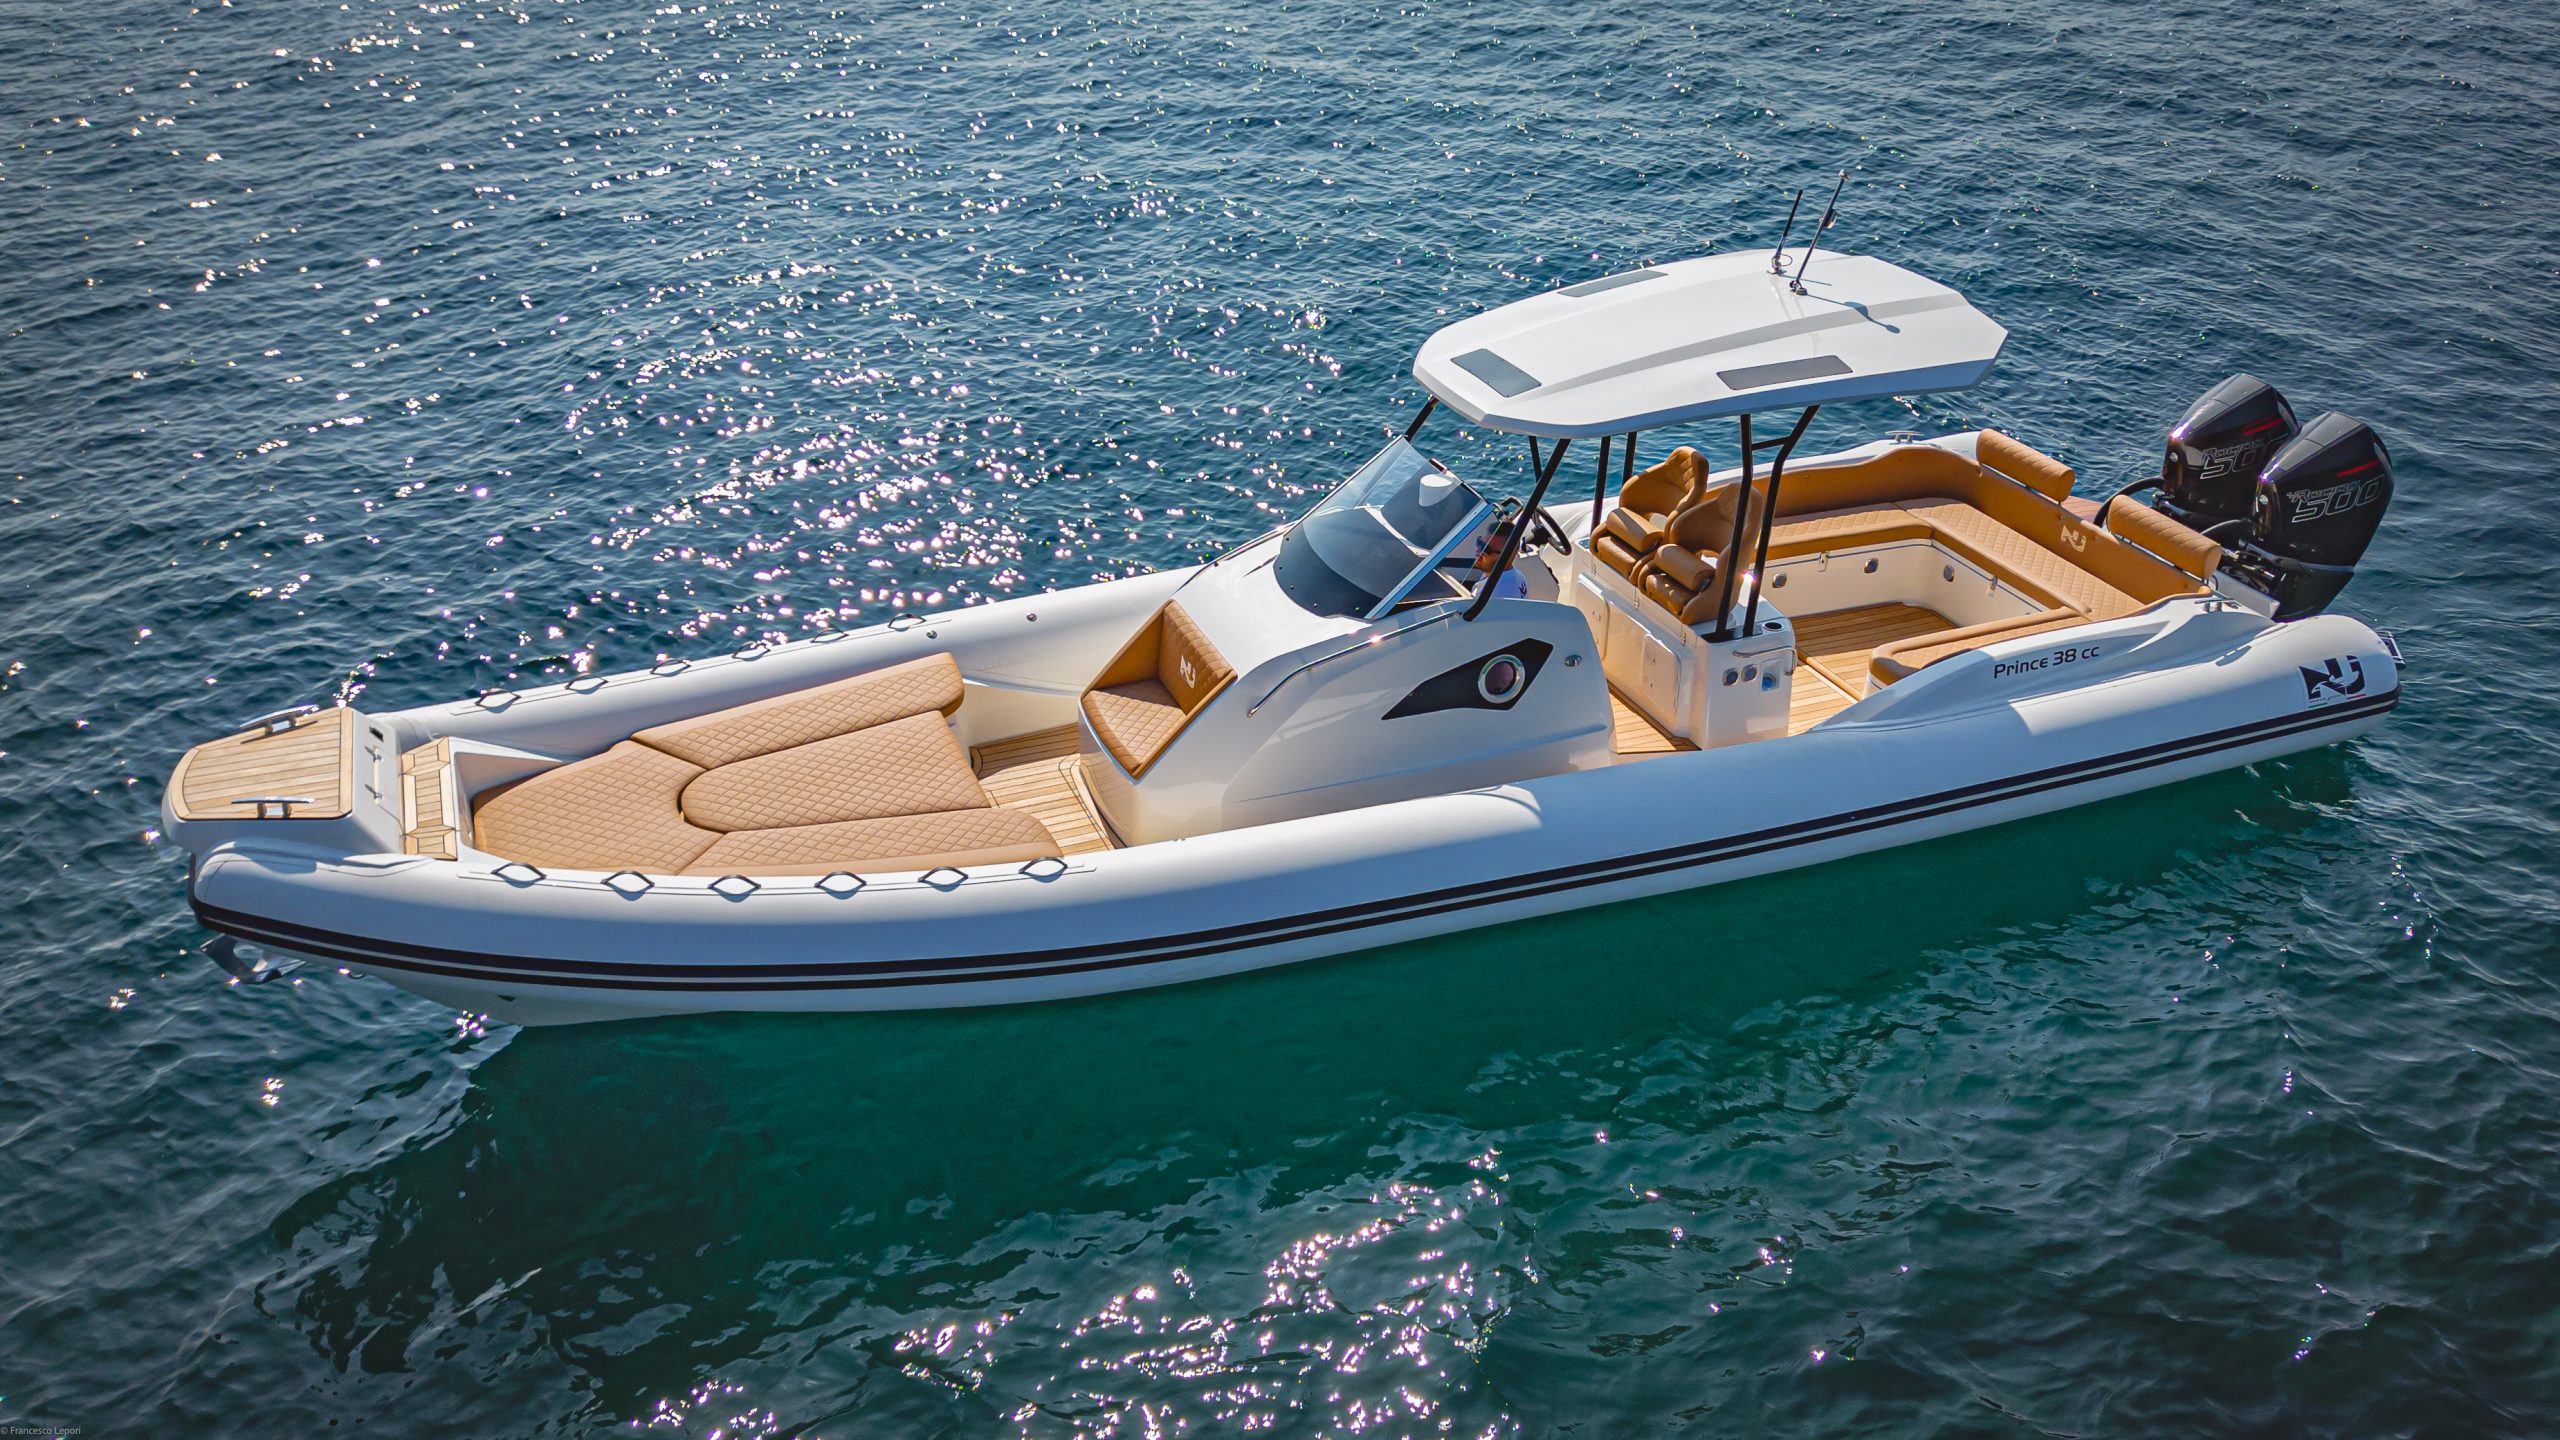 GAMME PRINCE OPEN | NUOVA JOLLY PRINCE 38